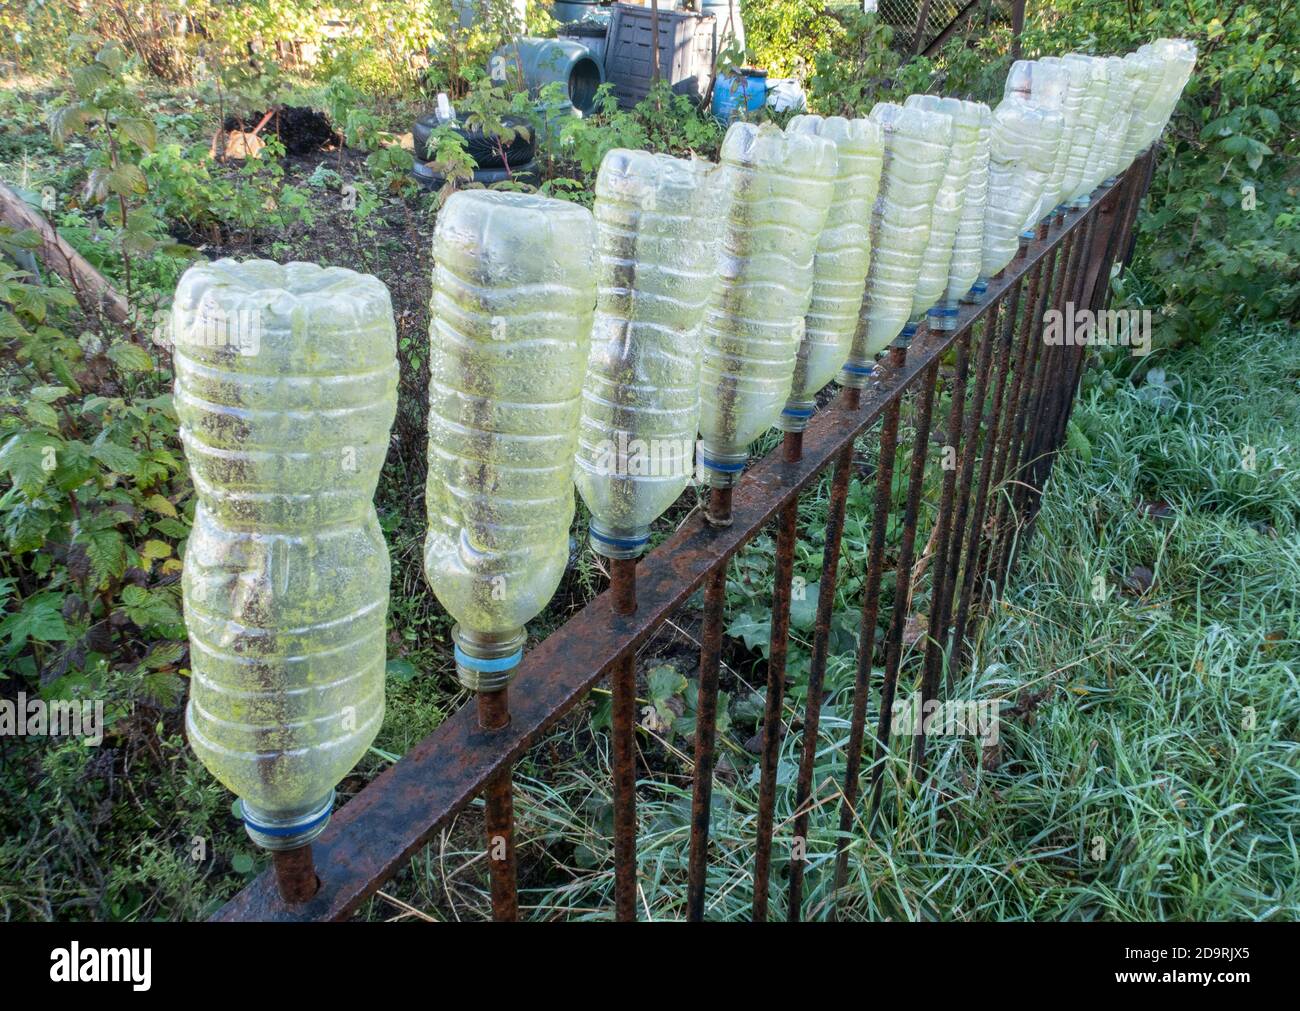 Plastic water bottles covering the spikes on railings at allotments in Sidmouth, Devon, England, UK Stock Photo